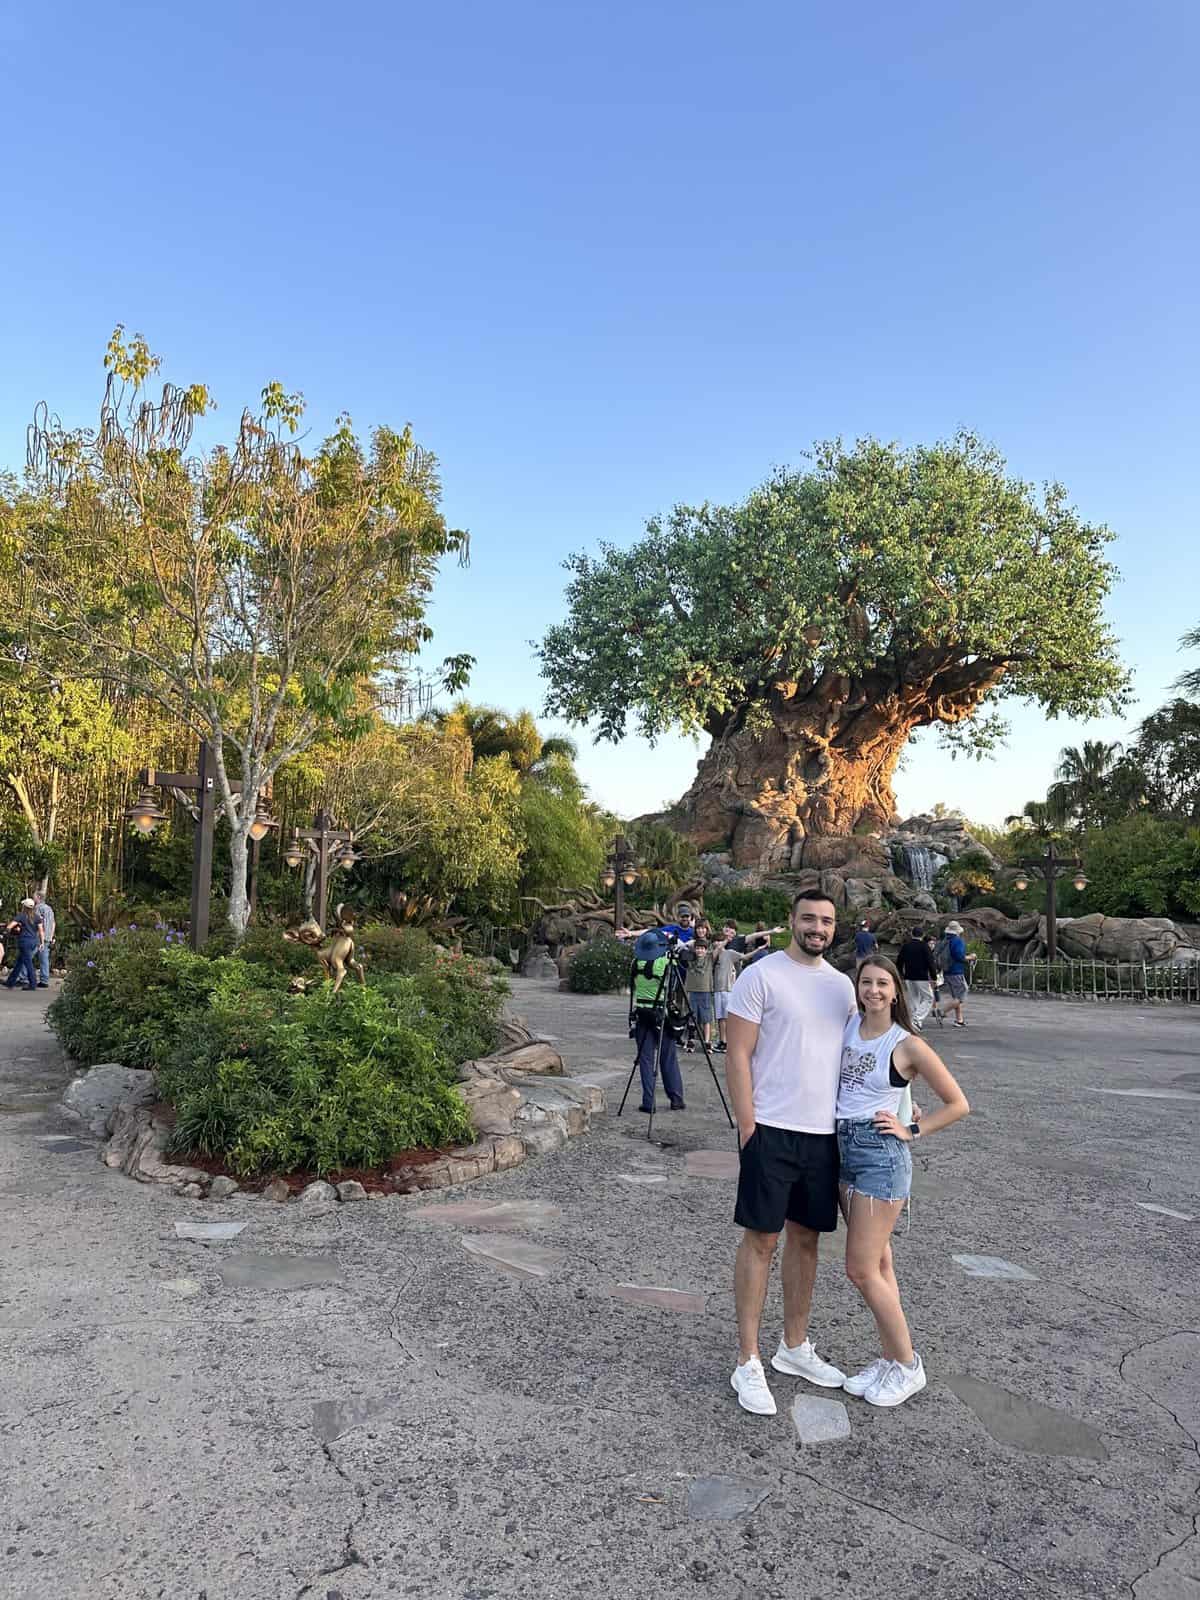 A couple posing in front of the Animal Kingdom tree.